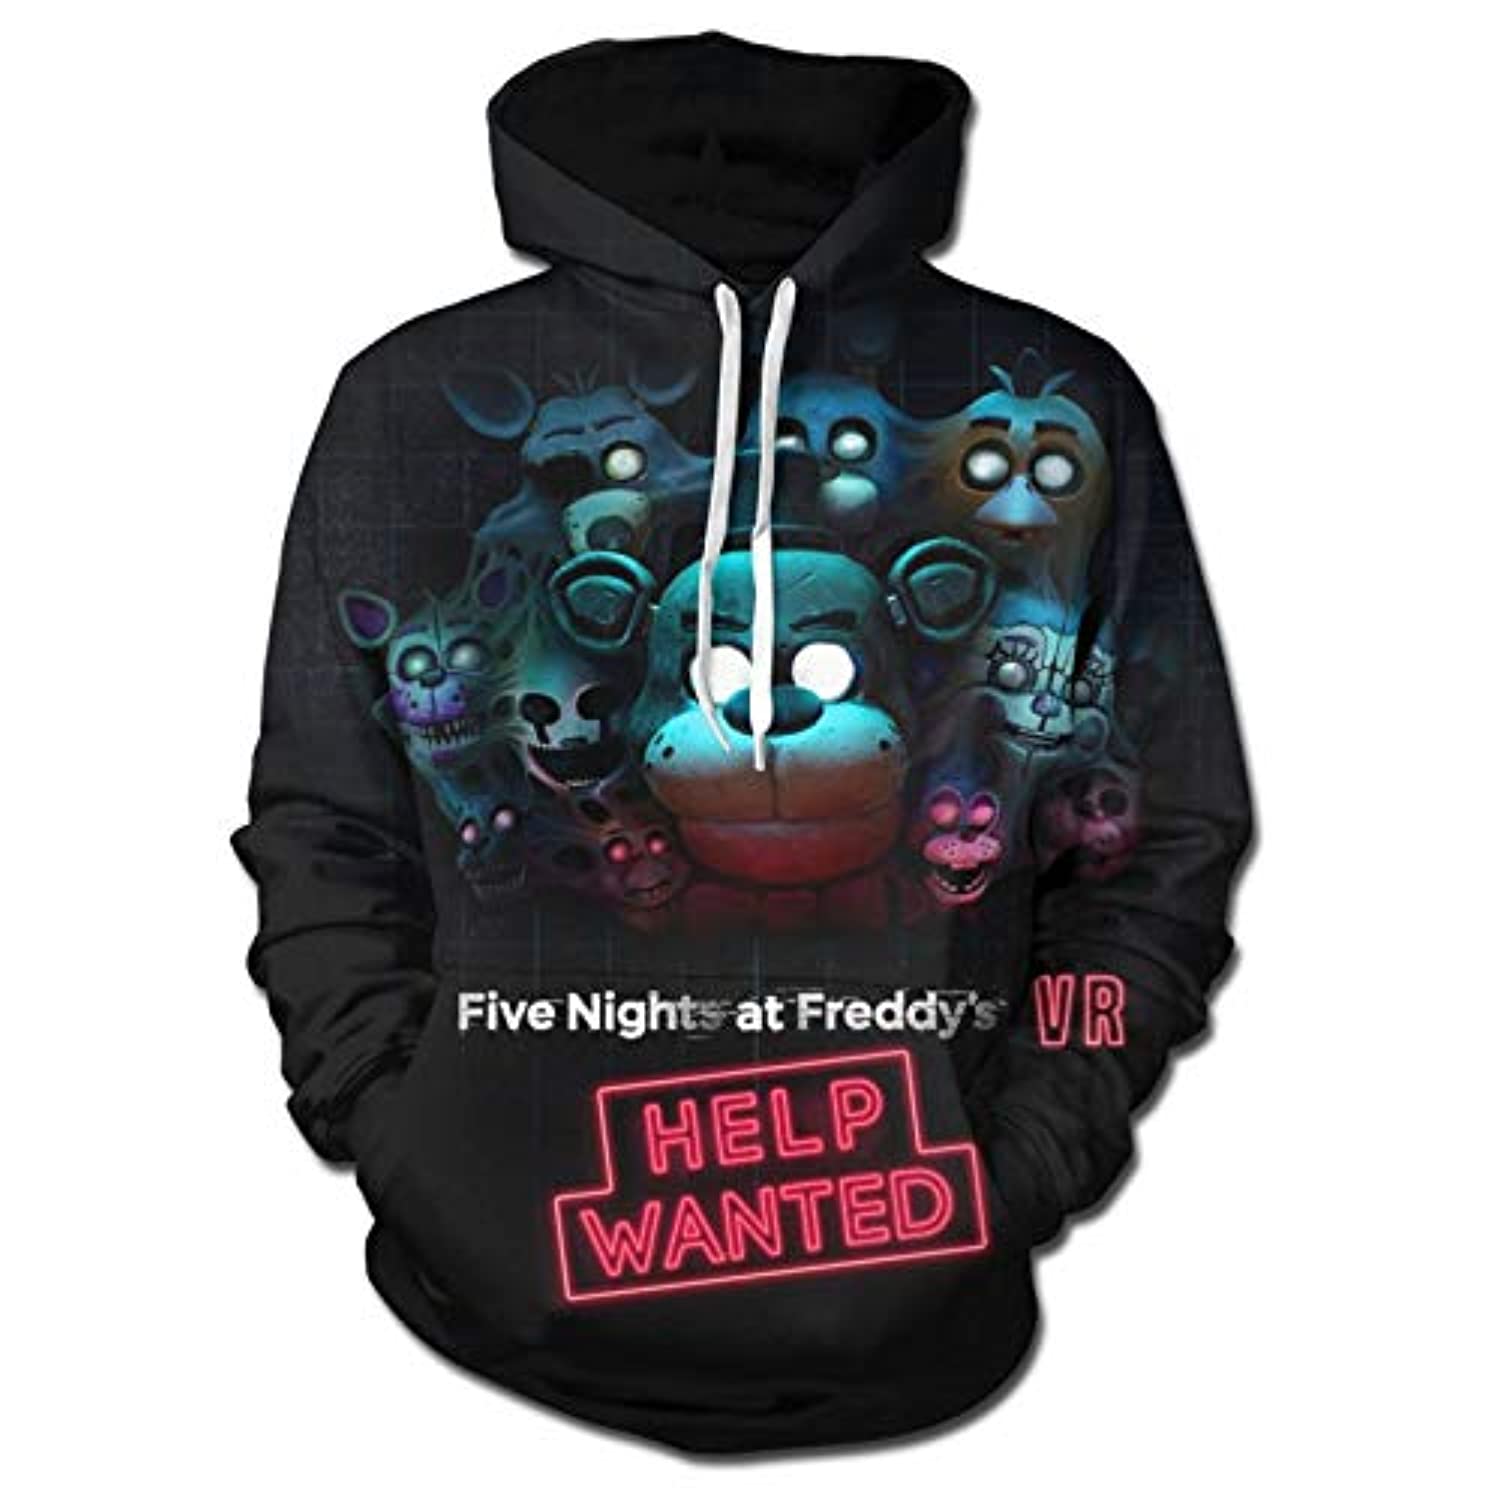 NOT Five Nights-at Freddy 3 Youth Boys Girls 3D Print Pullover Hoodies Hooded Seatshirts Sweaters